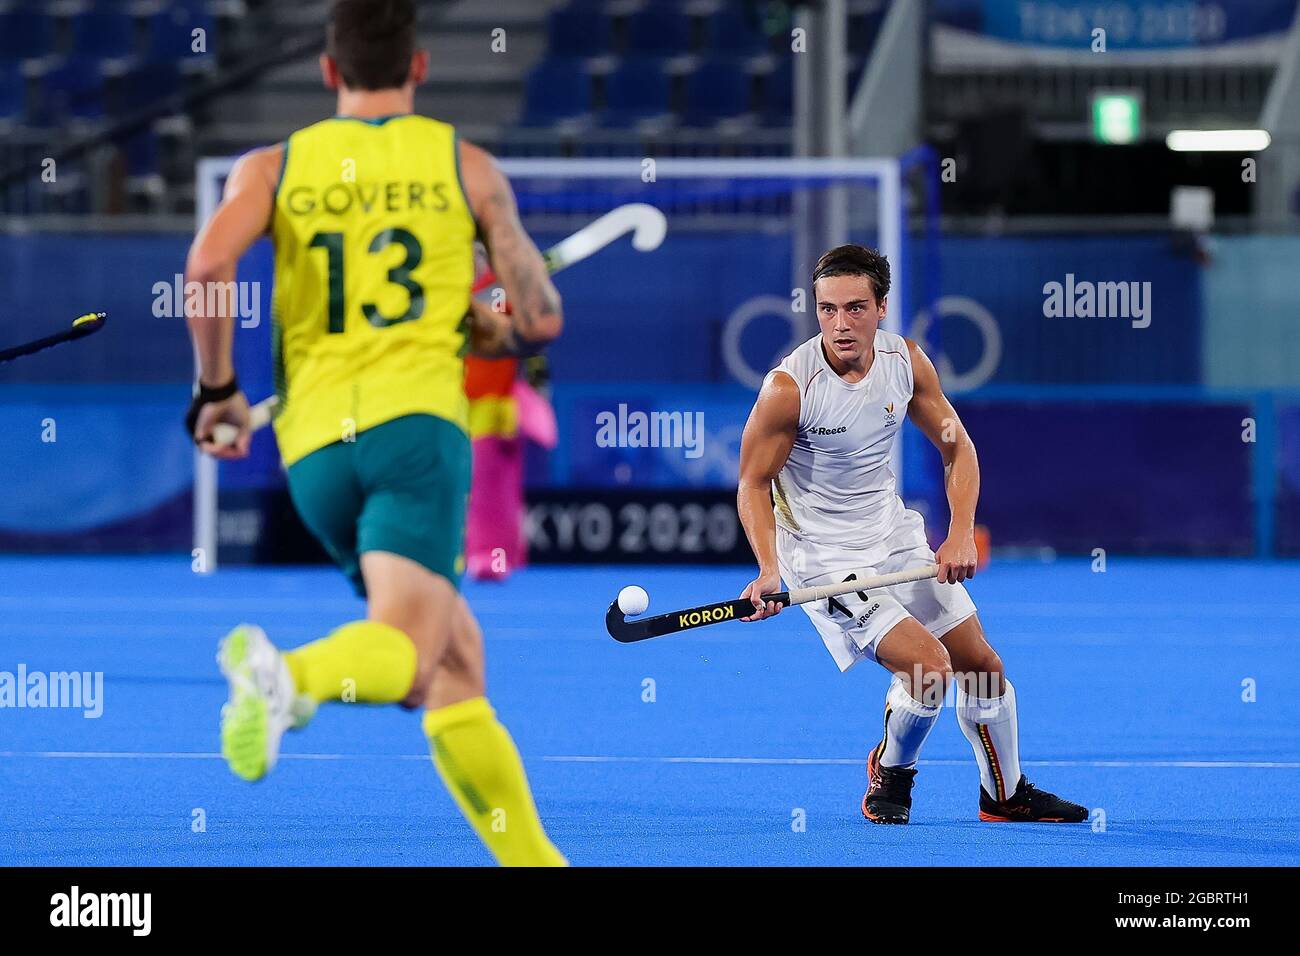 Tokyo, Japan, 5 August, 2021. Thomas Briels of Team Belgium during the Men's Hockey Gold Medal match between Australia and Belgium on Day 13 of the Tokyo 2020 Olympic Games. Credit: Pete Dovgan/Speed Media/Alamy Live News Stock Photo